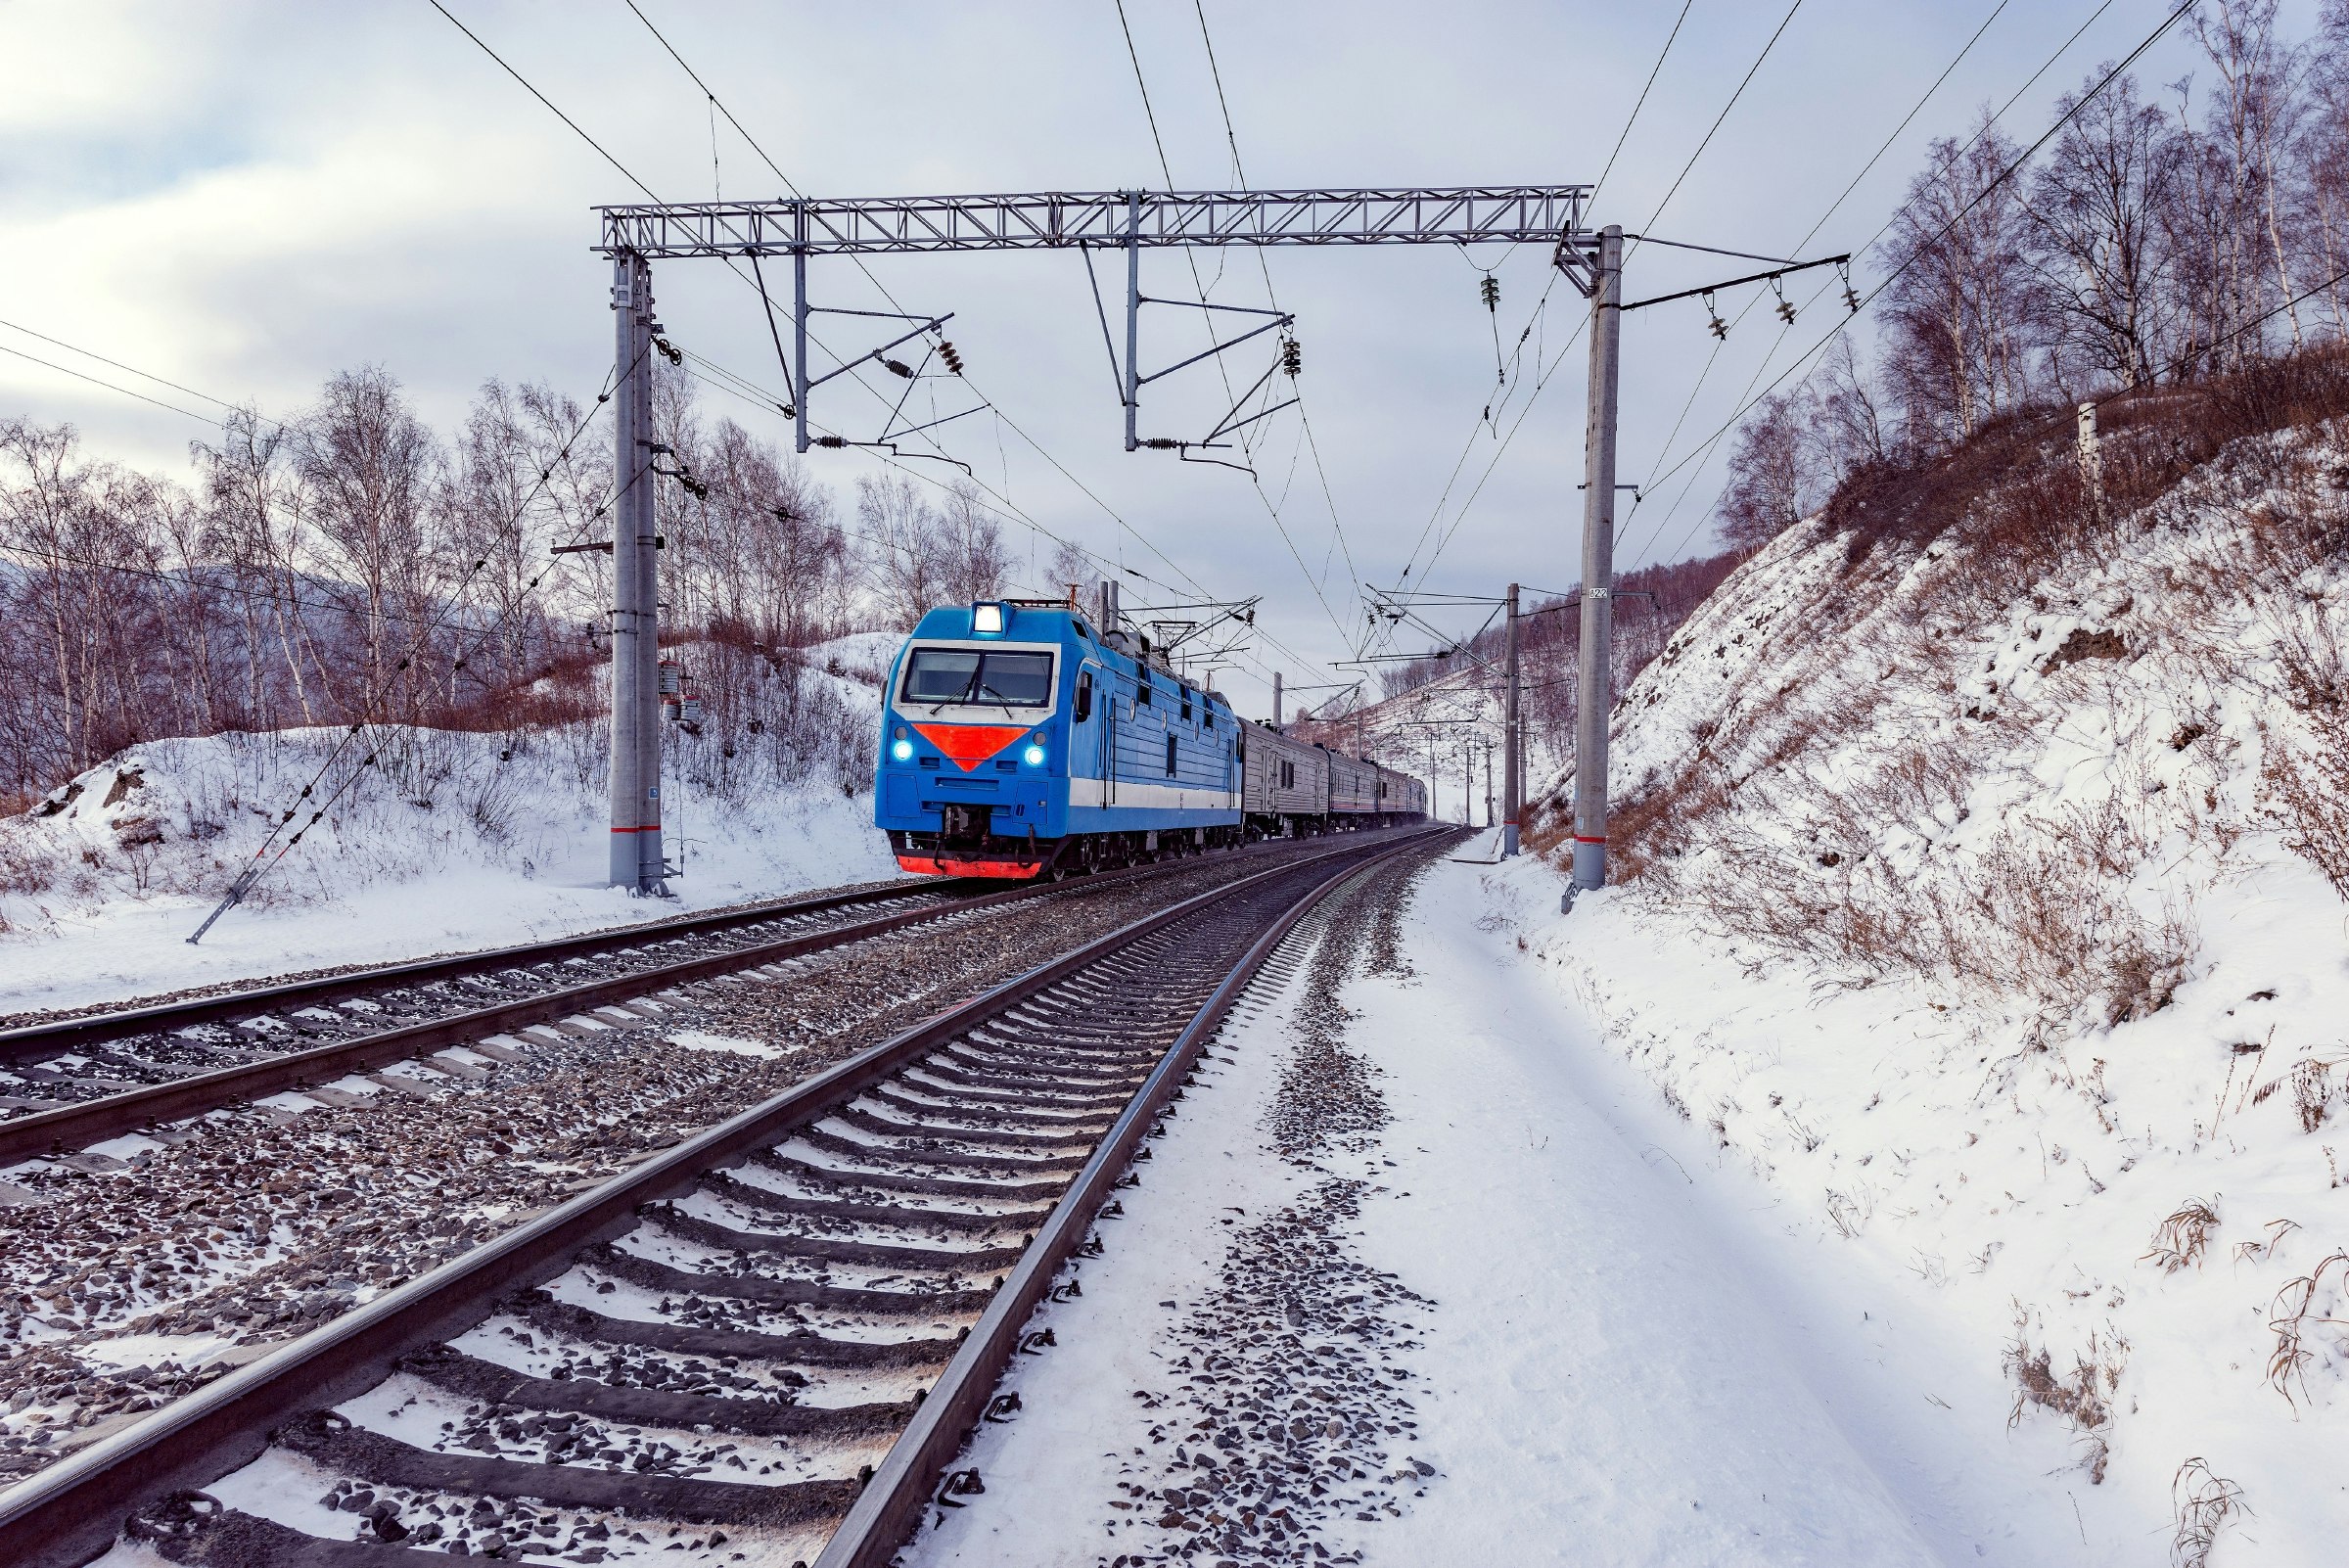 Snow-covered train tracks with a blue-and-red train approaching